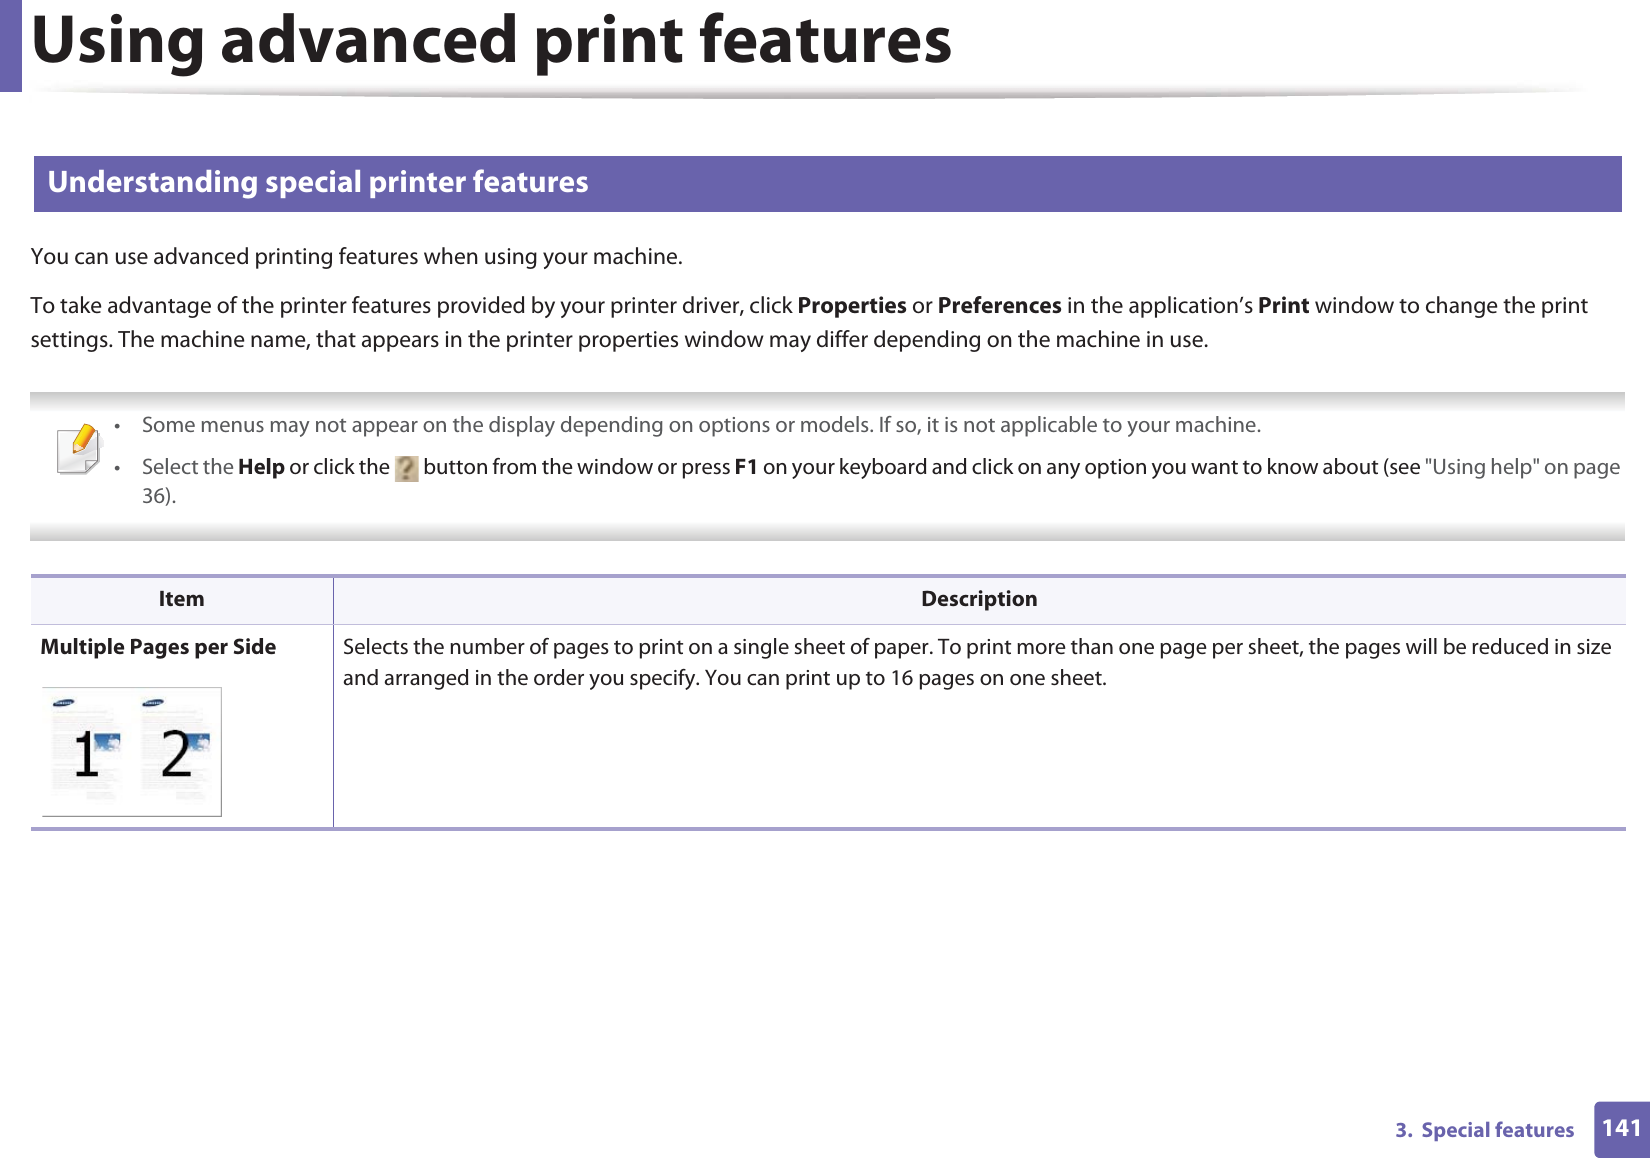 Using advanced print features1413.  Special features2 Understanding special printer featuresYou can use advanced printing features when using your machine.To take advantage of the printer features provided by your printer driver, click Properties or Preferences in the application’s Print window to change the print settings. The machine name, that appears in the printer properties window may differ depending on the machine in use. • Some menus may not appear on the display depending on options or models. If so, it is not applicable to your machine.• Select the Help or click the   button from the window or press F1 on your keyboard and click on any option you want to know about (see &quot;Using help&quot; on page 36).  Item DescriptionMultiple Pages per Side Selects the number of pages to print on a single sheet of paper. To print more than one page per sheet, the pages will be reduced in size and arranged in the order you specify. You can print up to 16 pages on one sheet. 